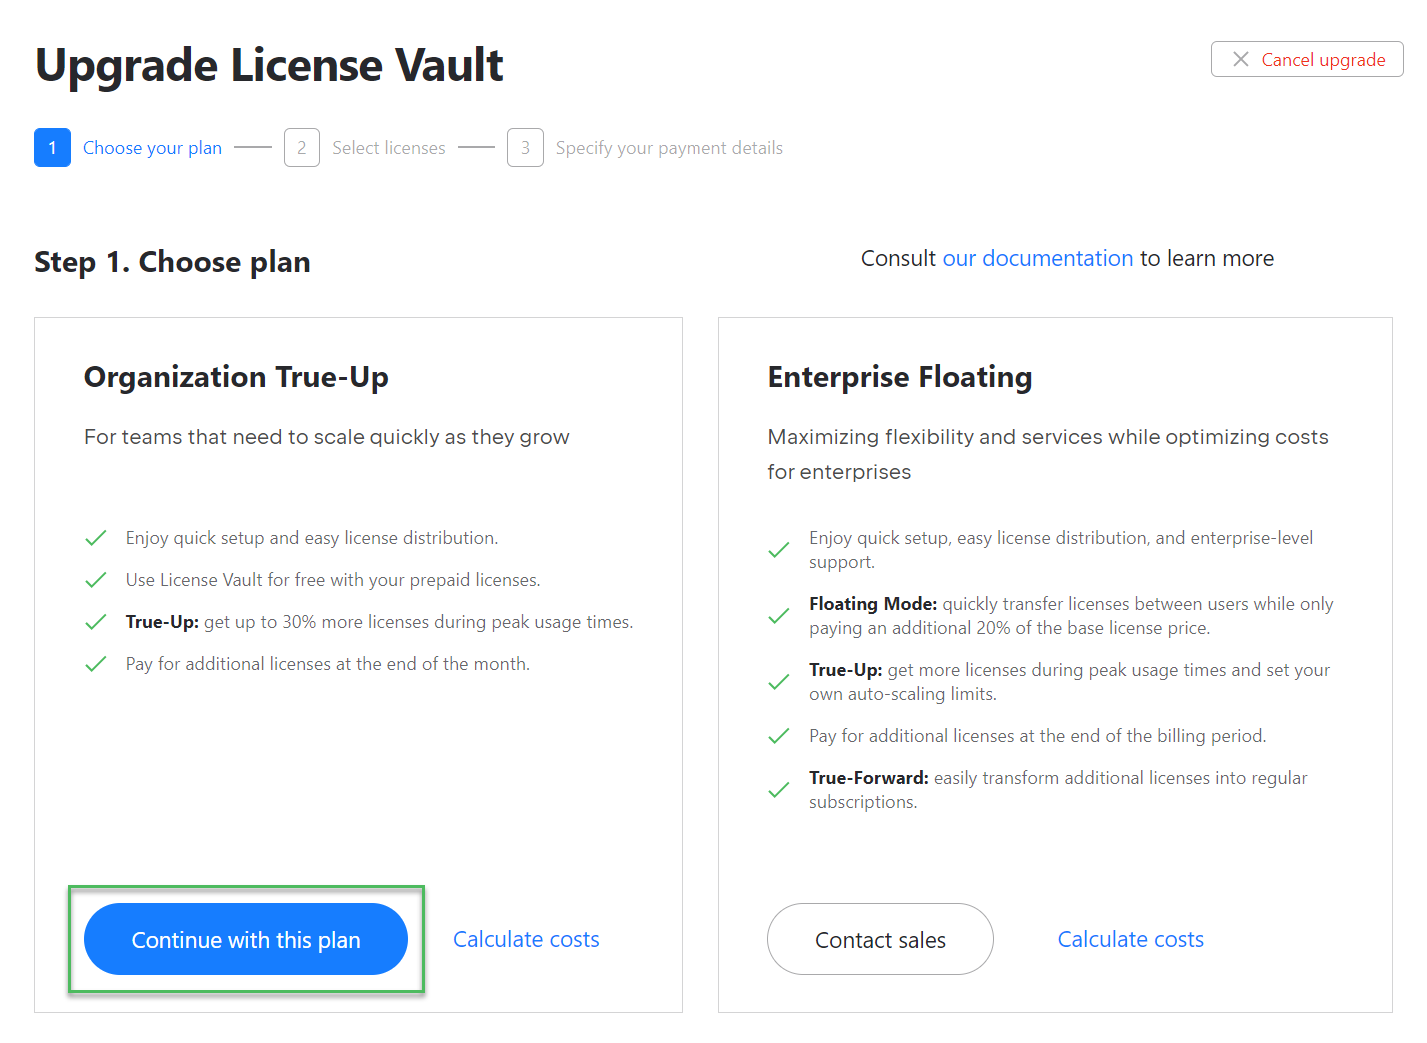 The button to upgrade to the Organization True-Up plan on the License Vault settings page